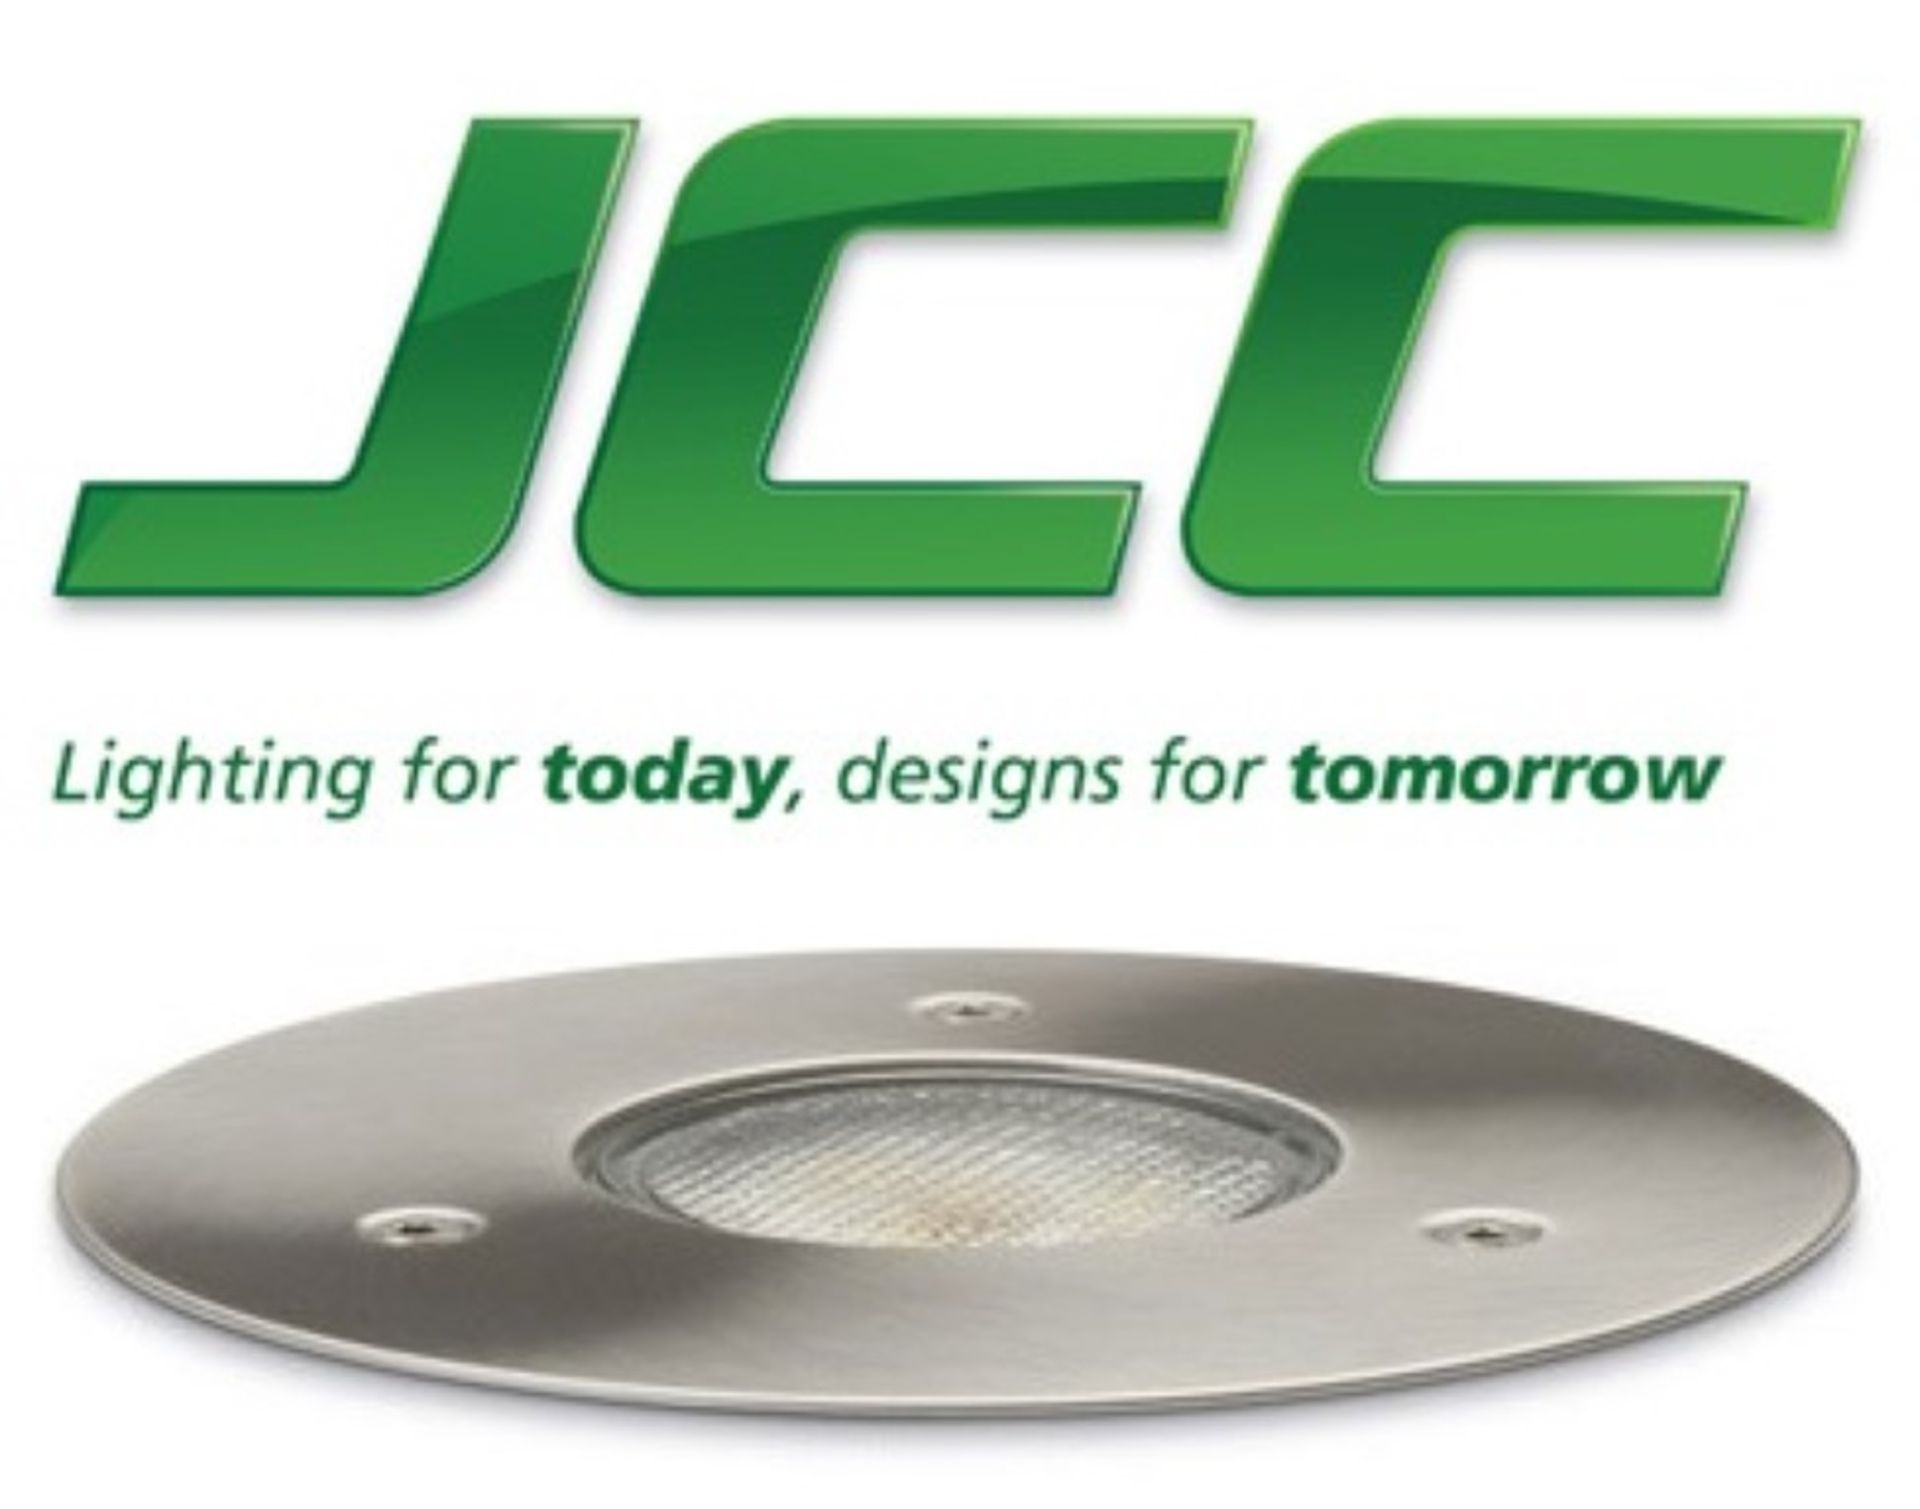 6 x JCC Lighting Exterior LED Mains Voltage Recessed GROUND UPLIGHT Sets - Ideal For Patios or - Image 3 of 8